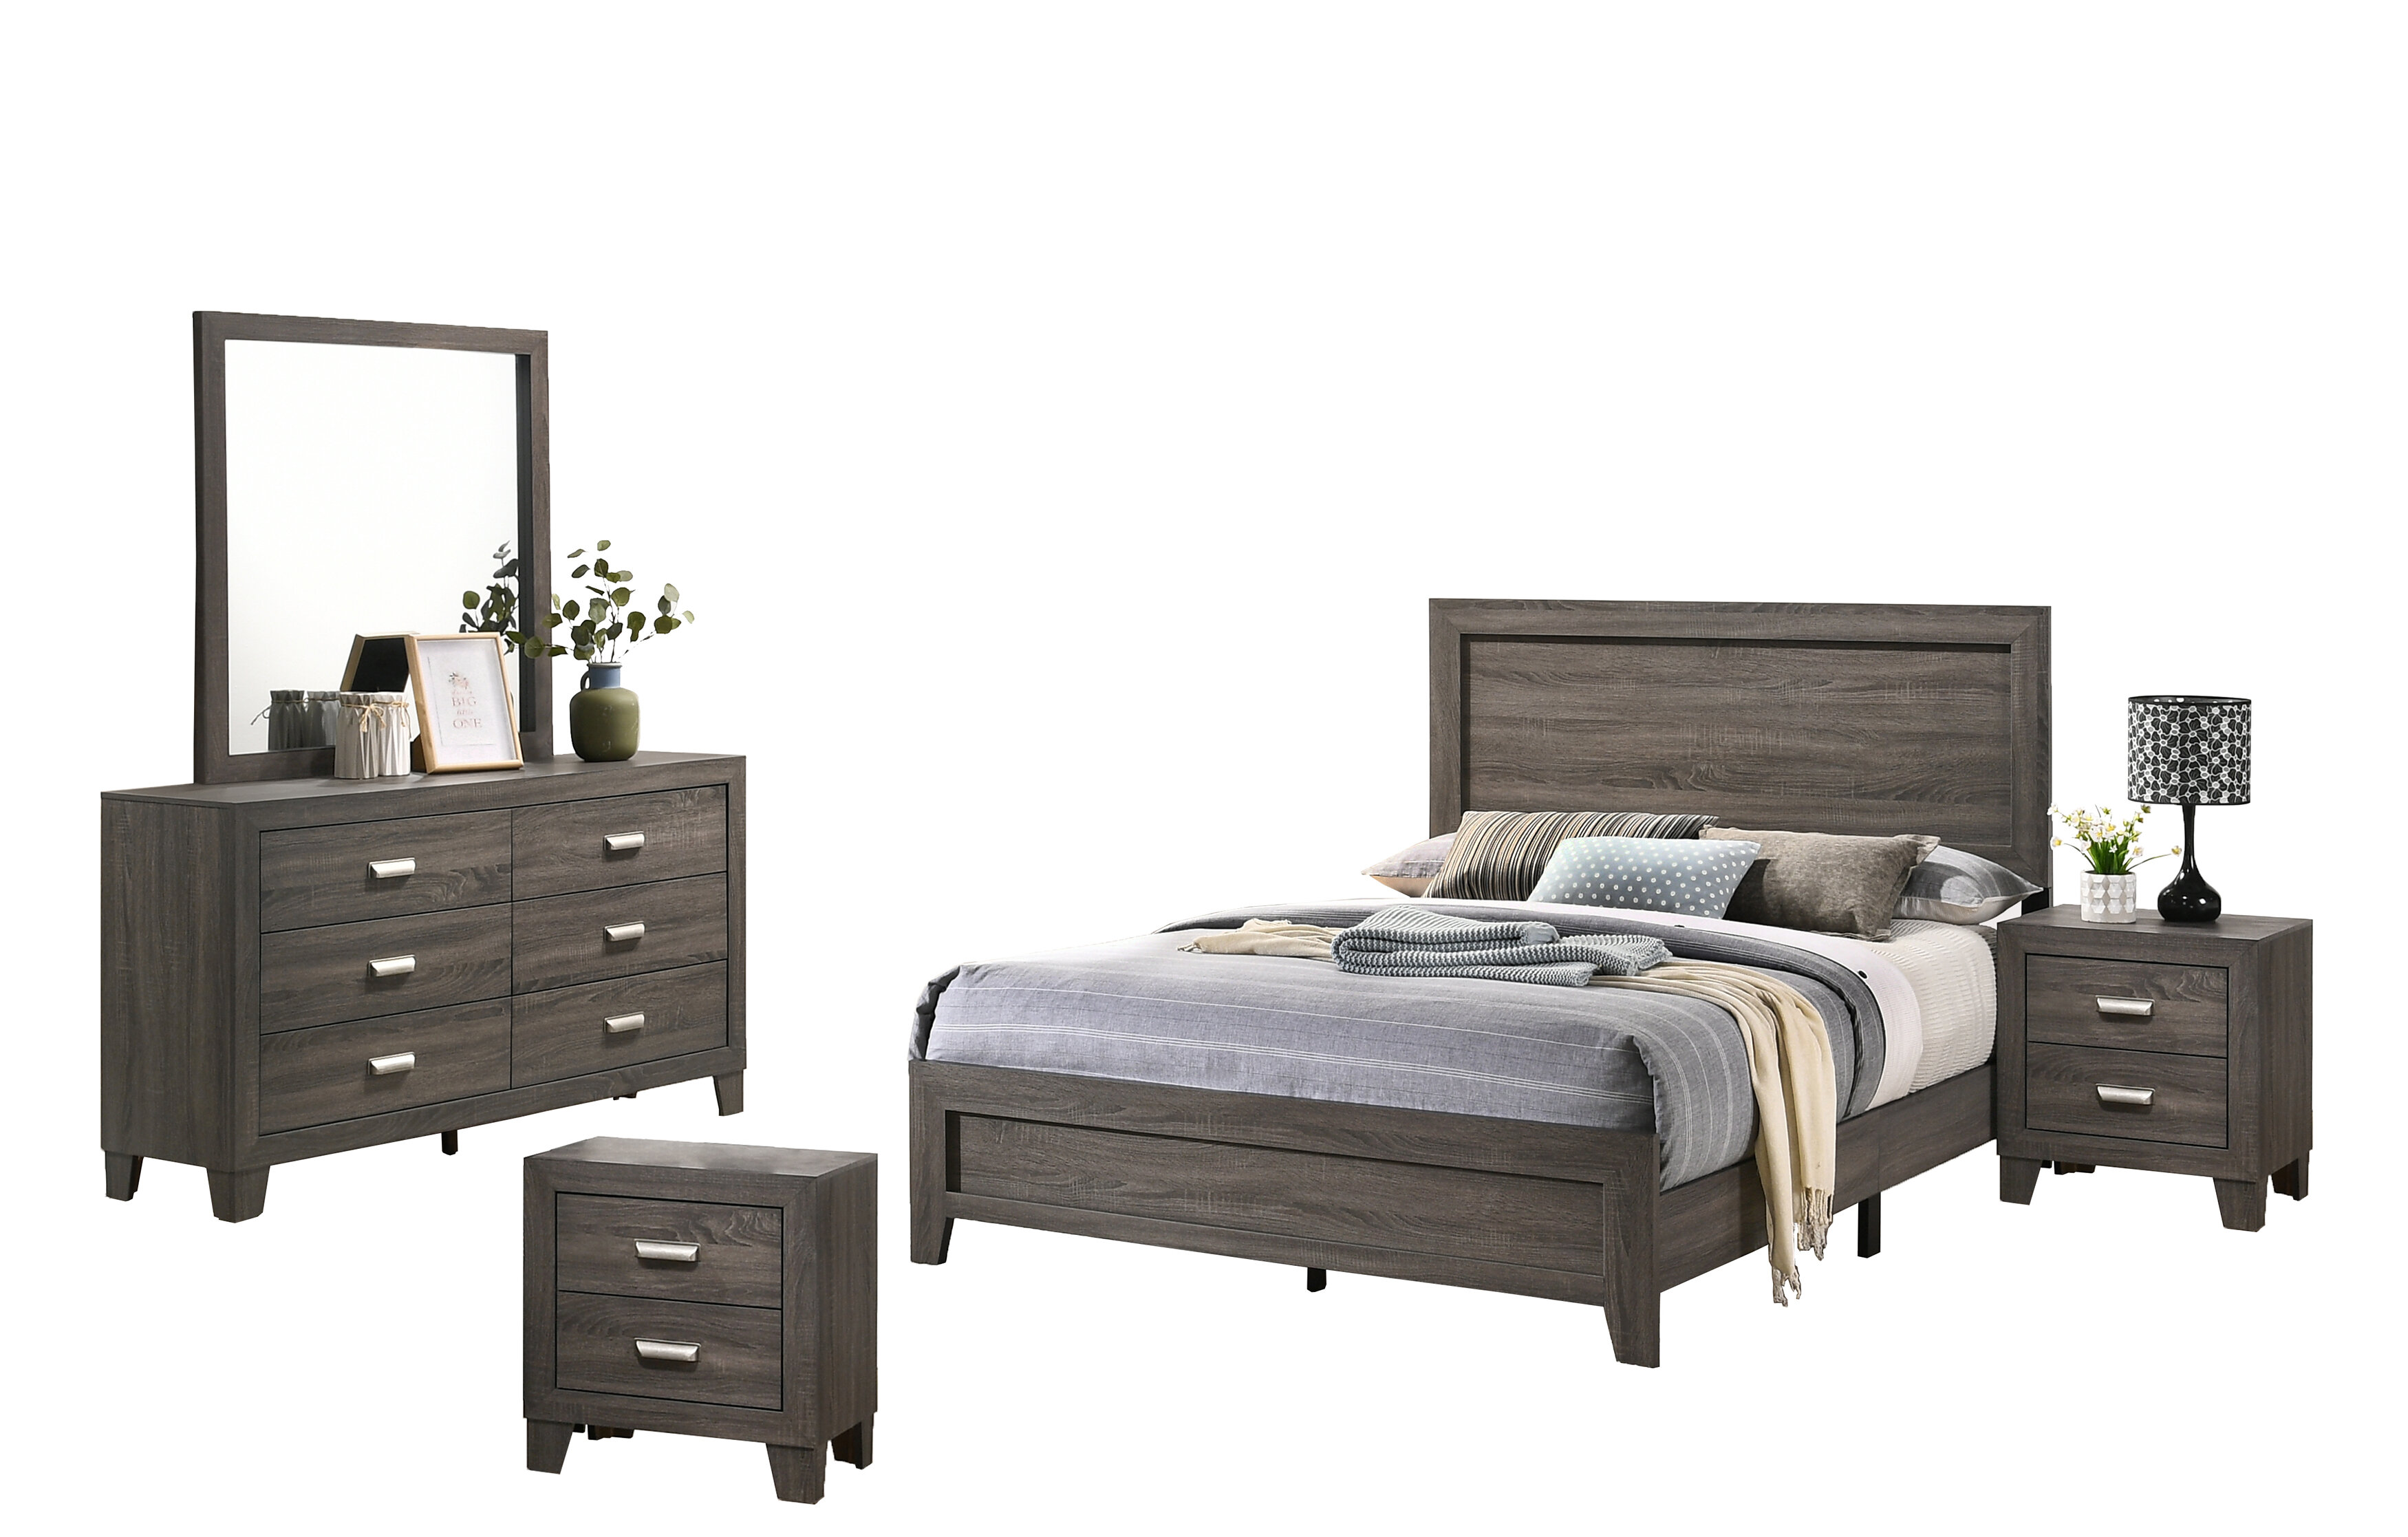 Modern Rustic Bedroom Sets Furniture Free Shipping Over 35 Wayfair